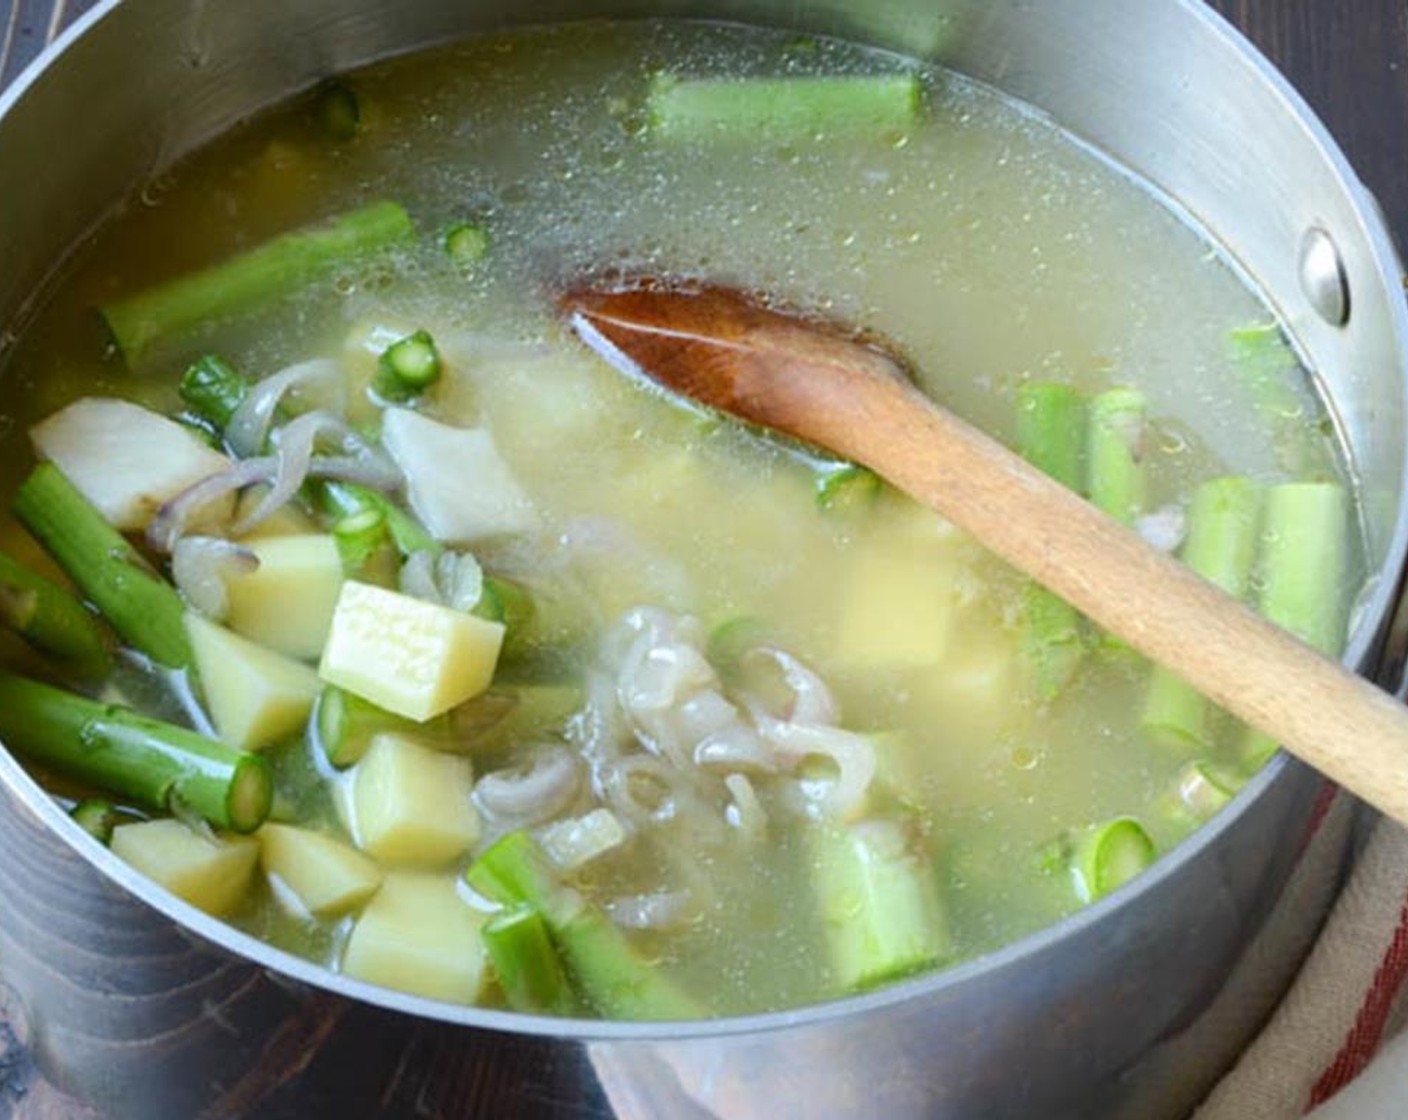 step 5 Add the asparagus, potato and sun chokes to the shallots. Add Low-Sodium Vegetable Broth (3 cups), cover and bring just to a boil. Turn down the heat to simmer and cook for 20 minutes until vegetables are tender.